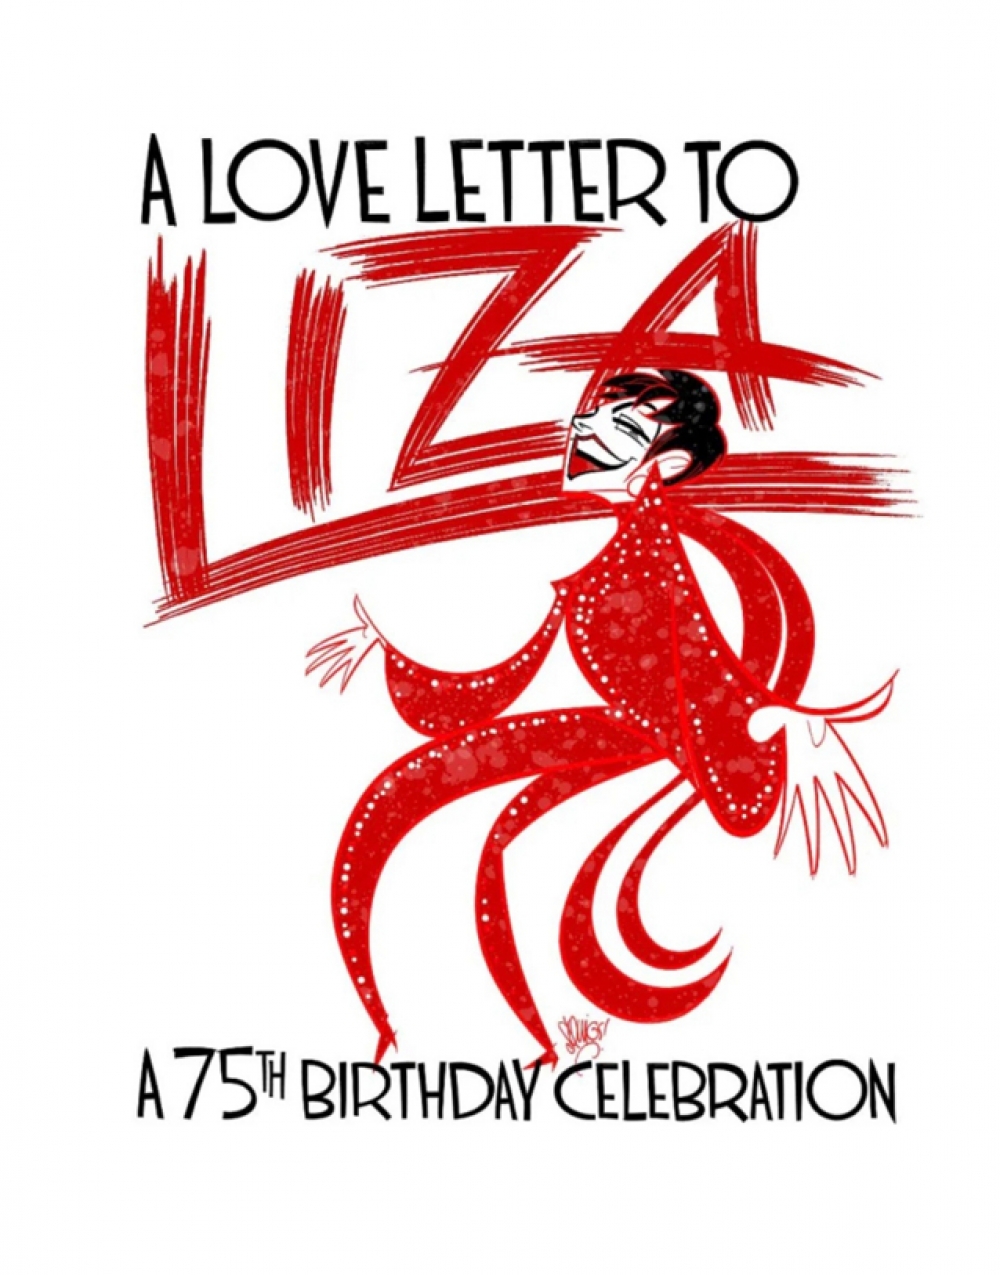 A Love Letter to Liza: A 75th Birthday Tribute Celebration at 